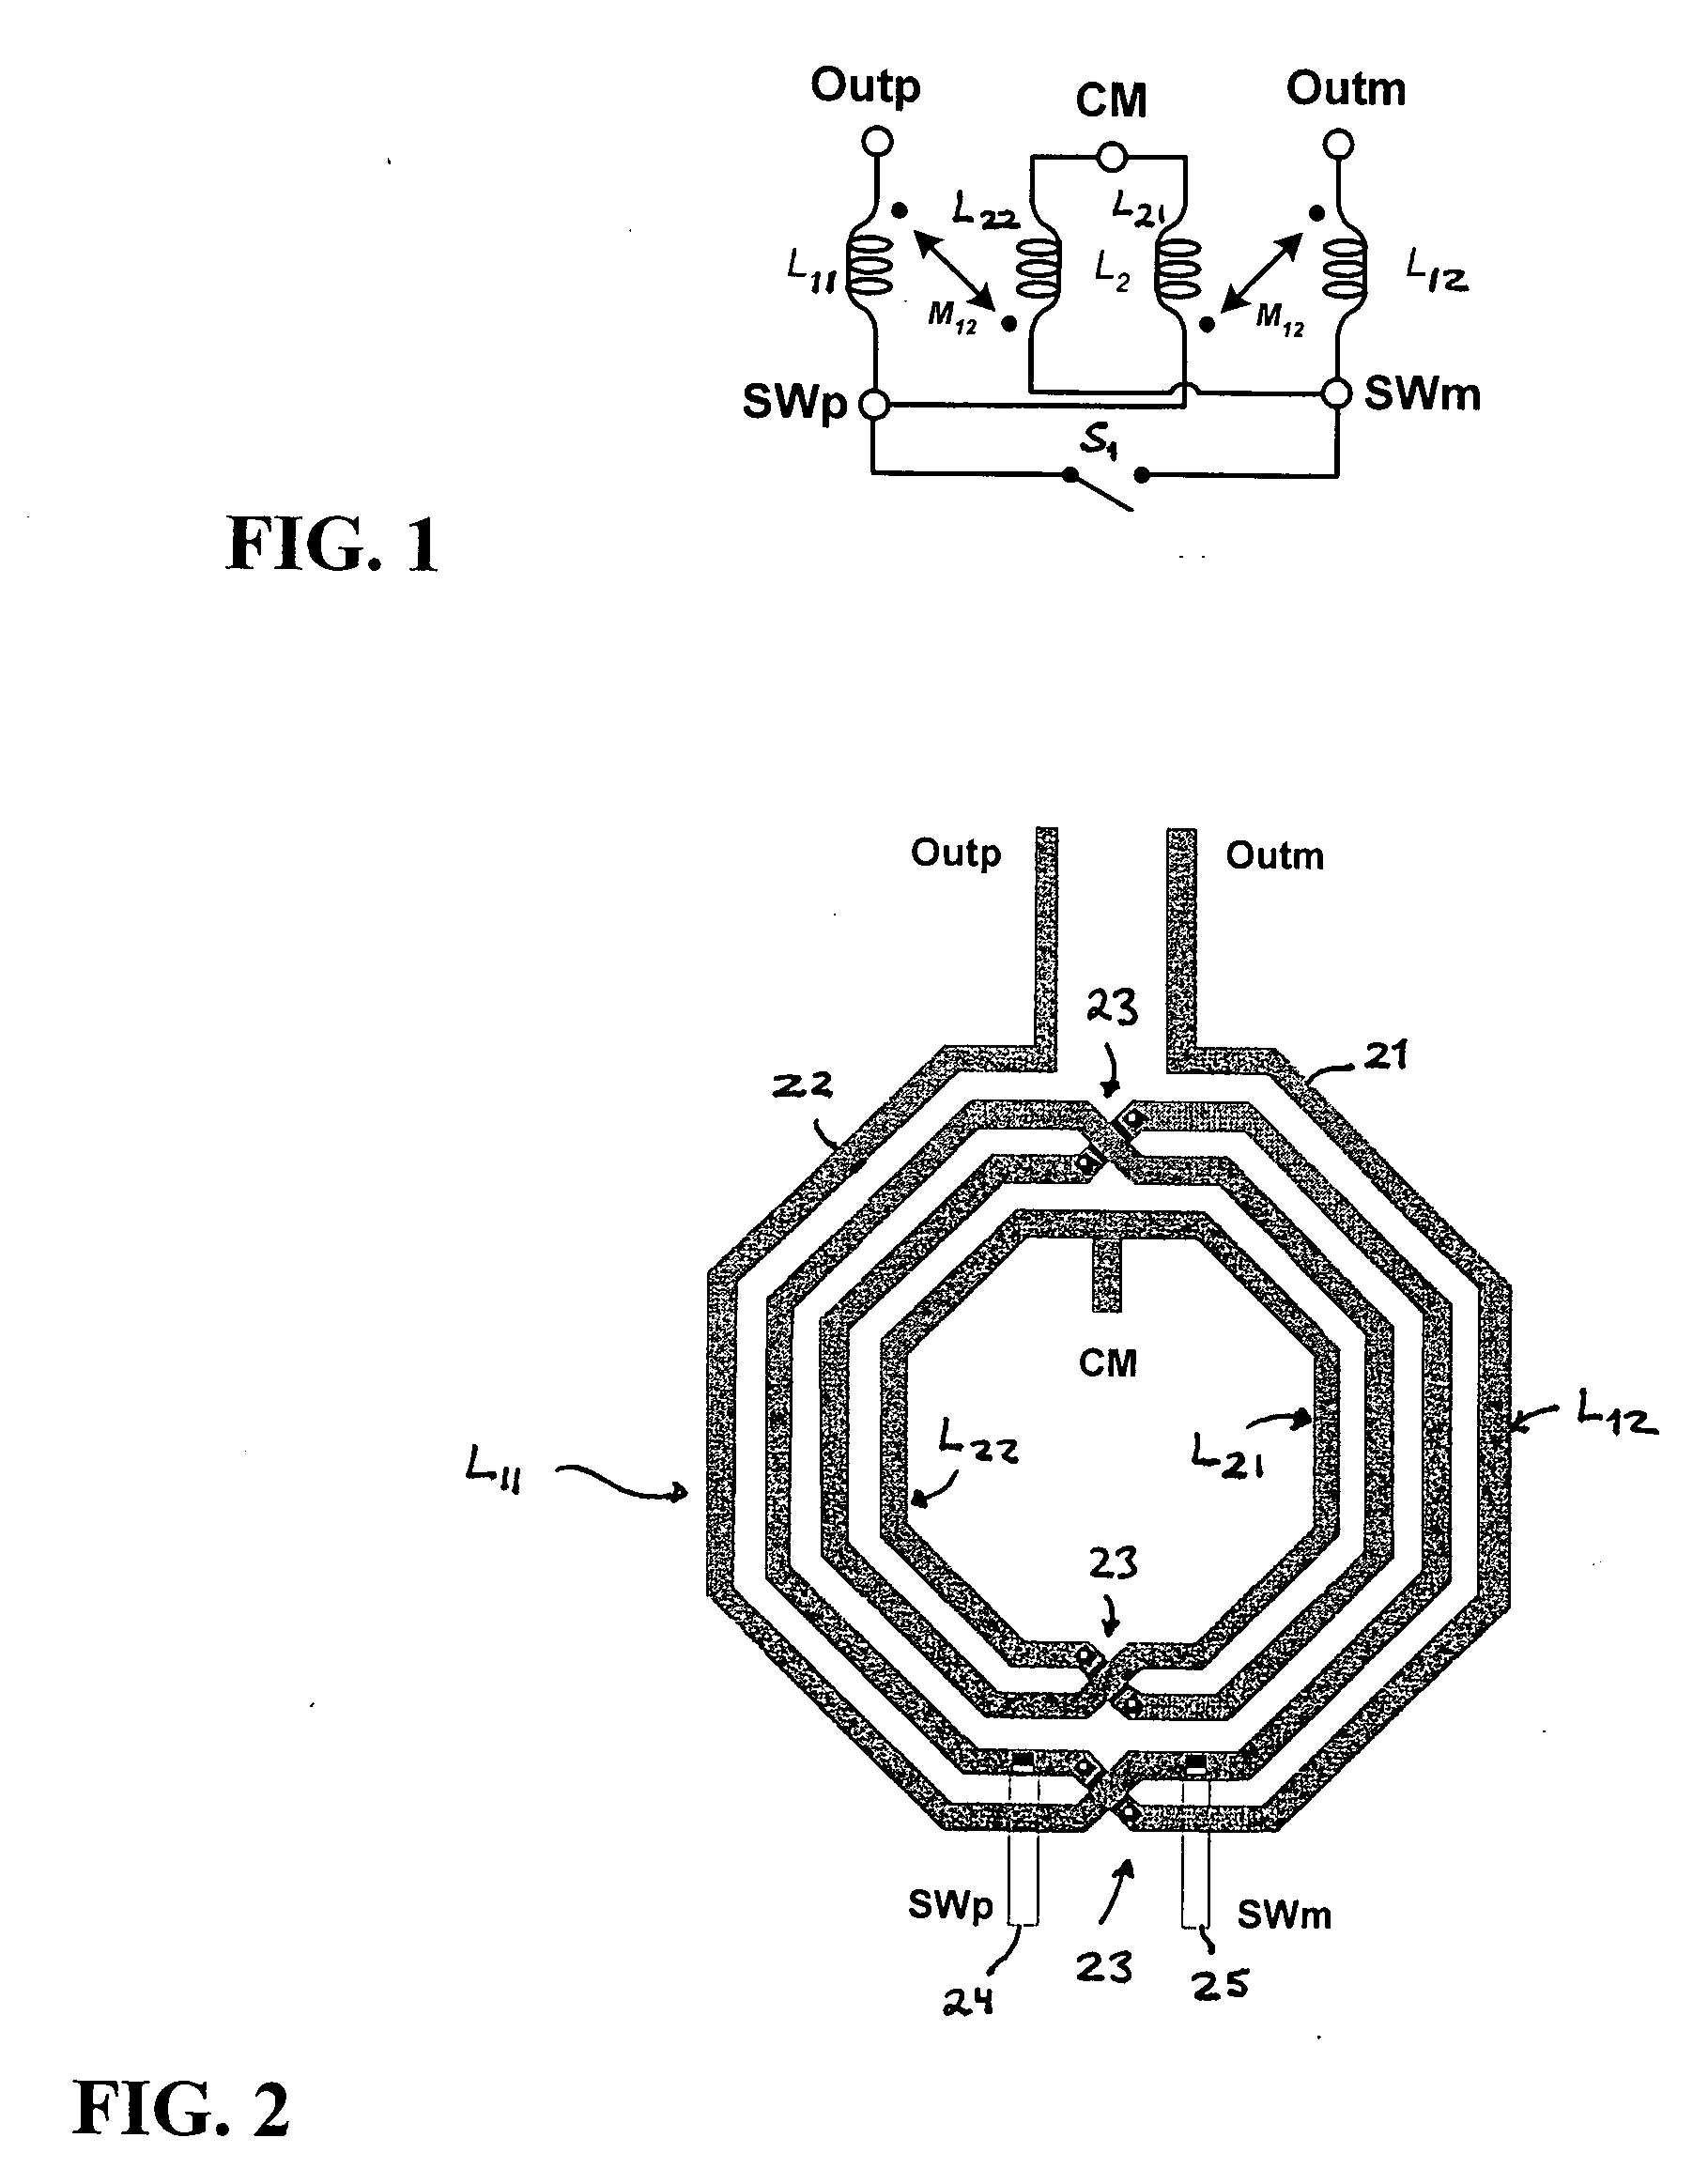 Inductor device for multiband radio frequency operation